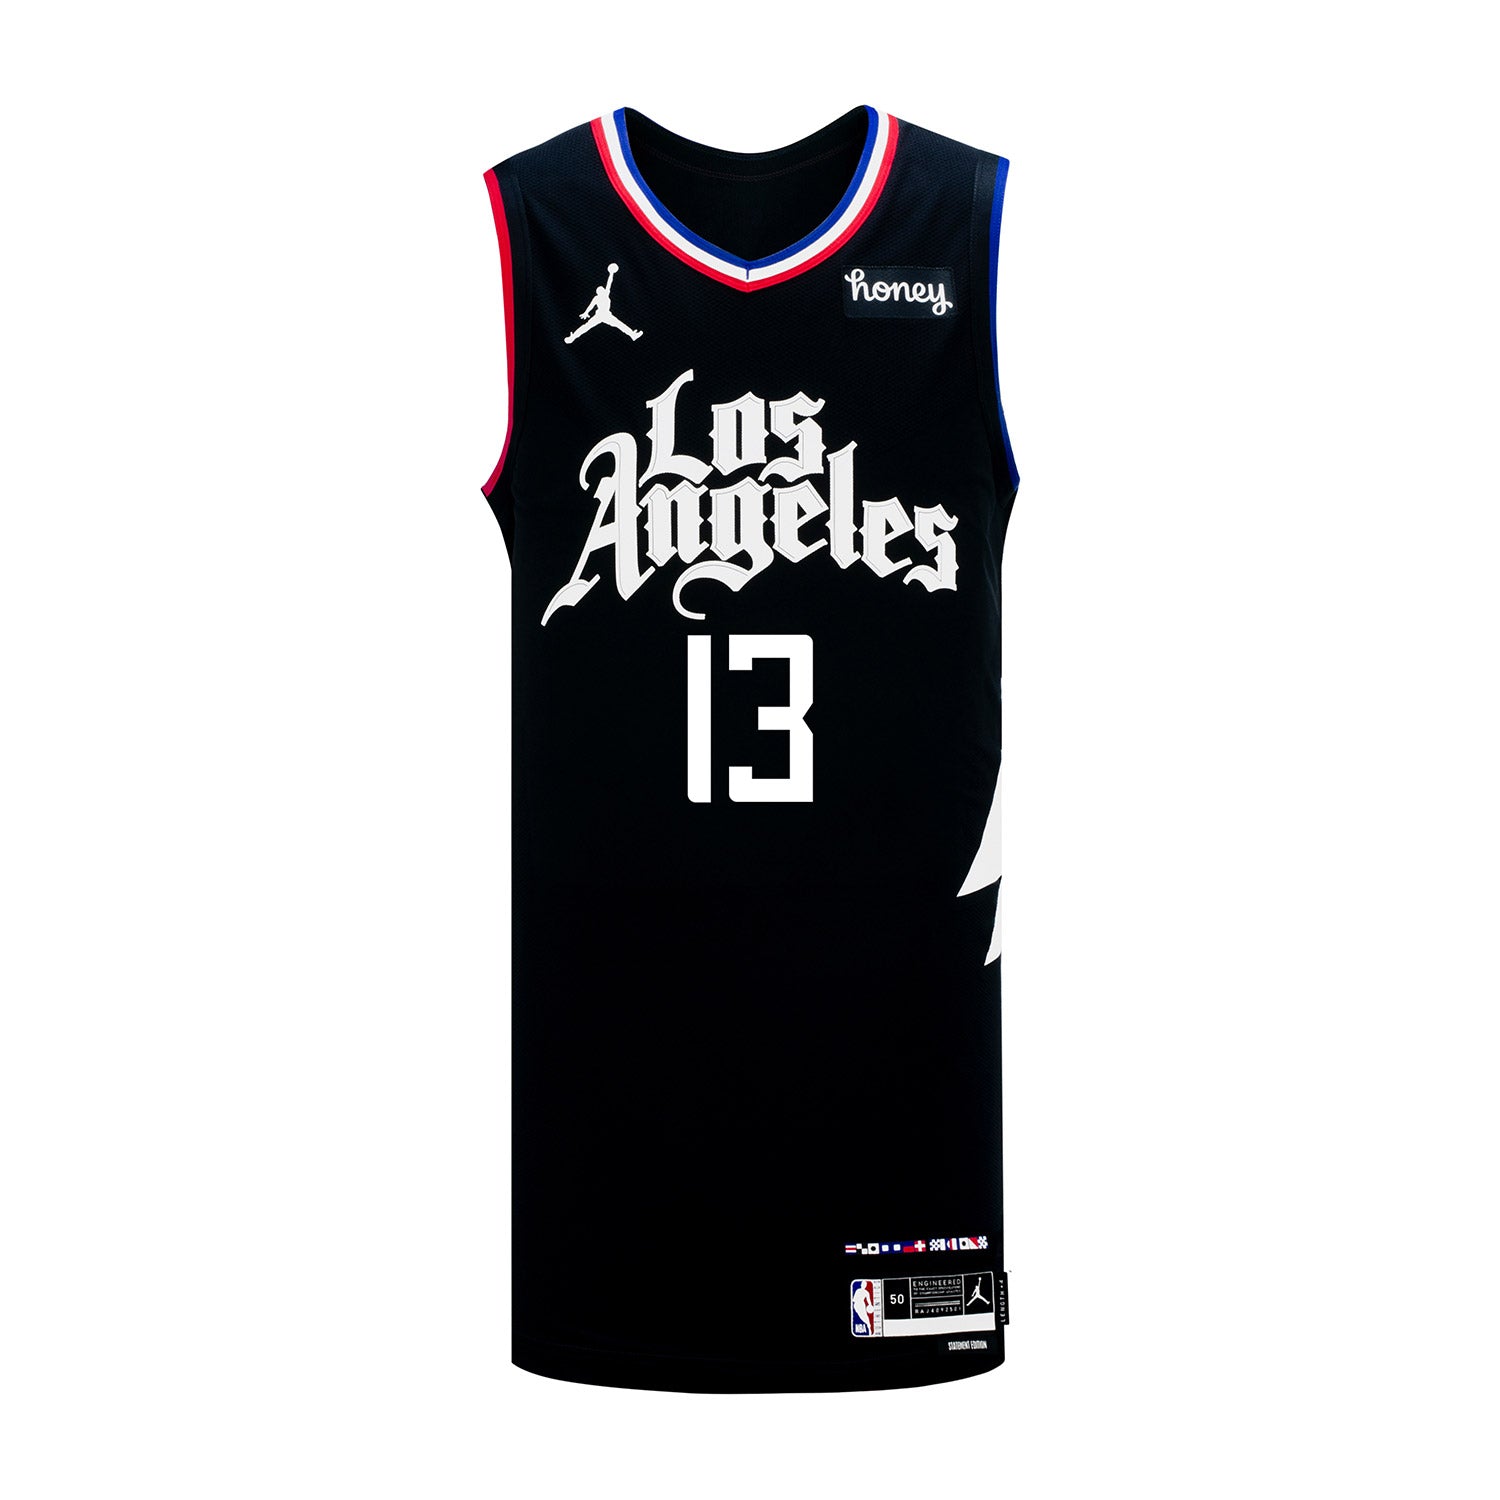 Los Angeles Clippers Nike City Edition Swingman Jersey 22 - Black - Paul  George - Youth